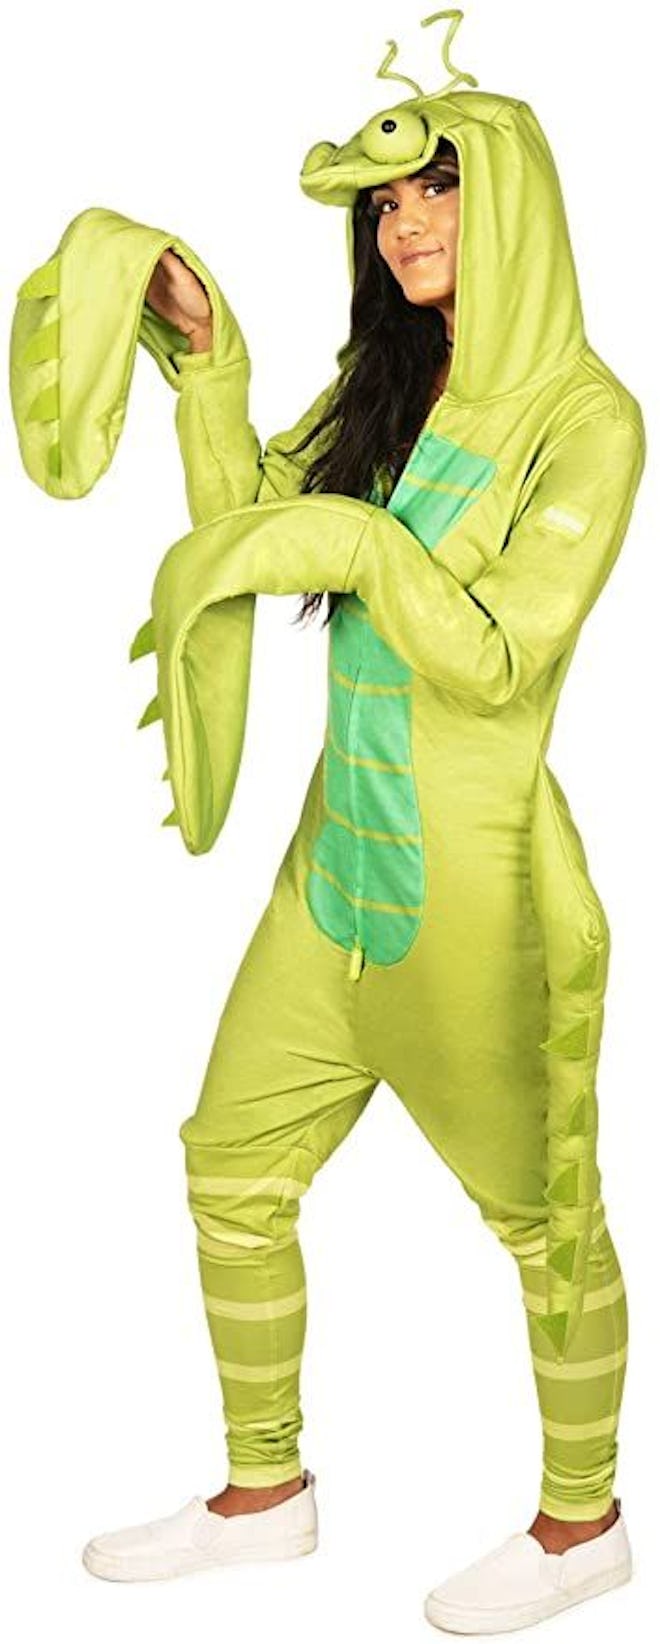 Tipsy Elves’ Women's Praying Mantis Costume - Green Insect Halloween Jumpsuit